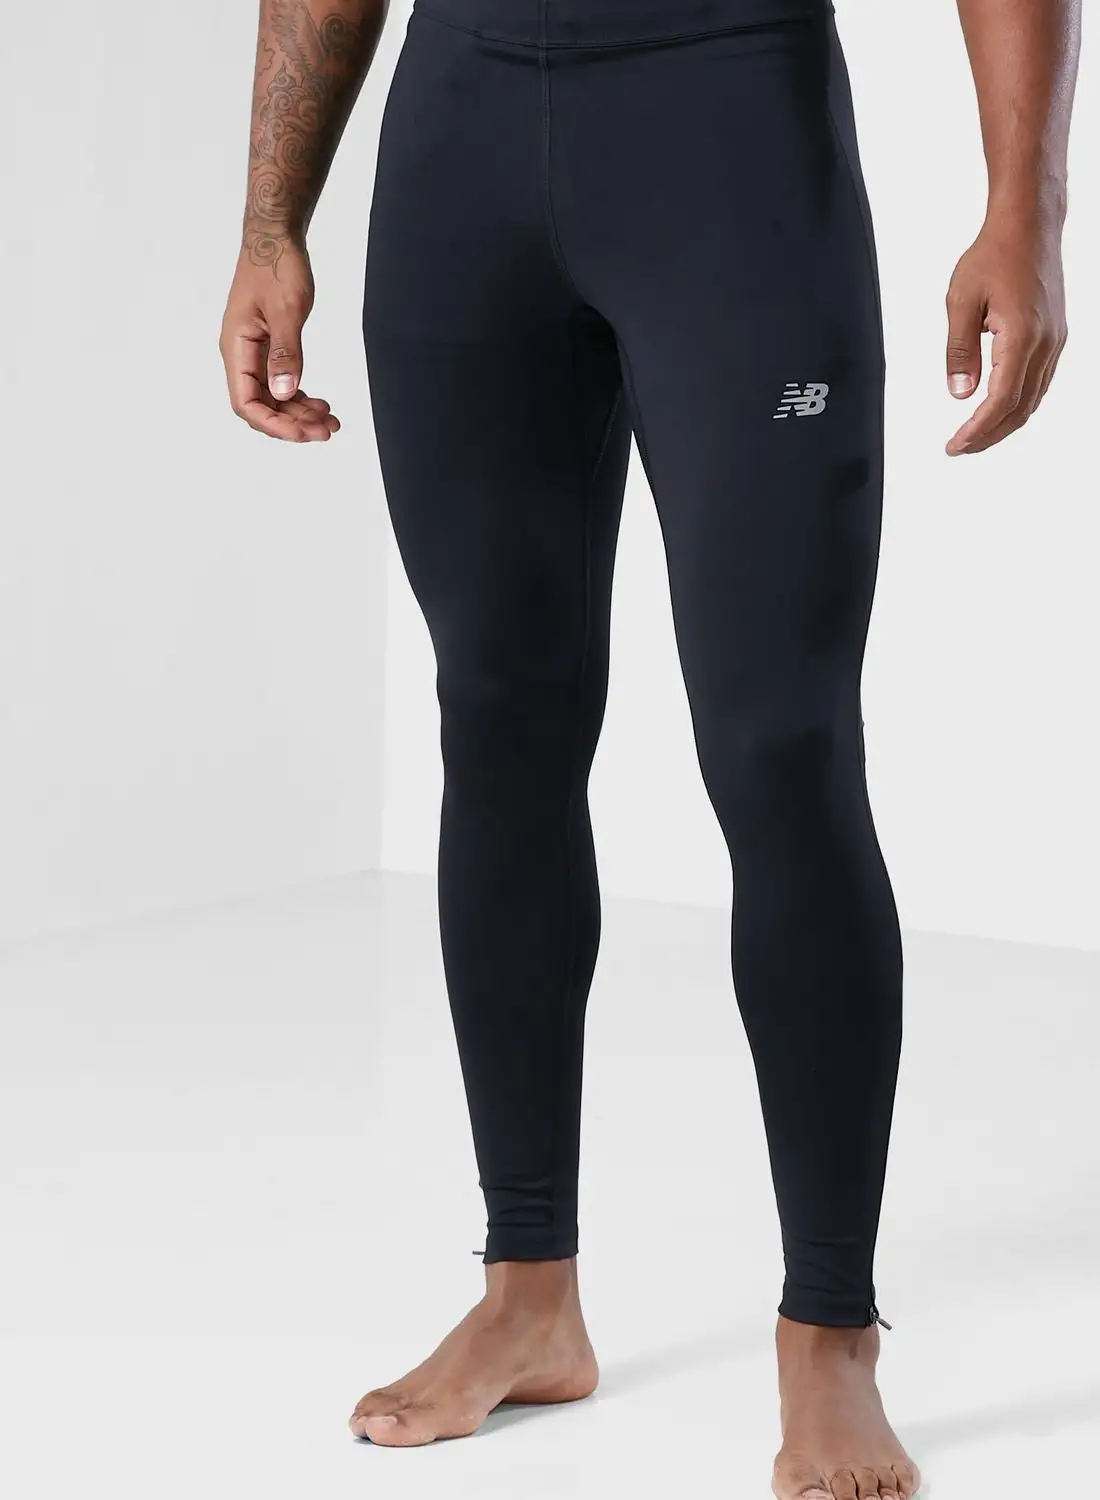 New Balance Accelerate Tights